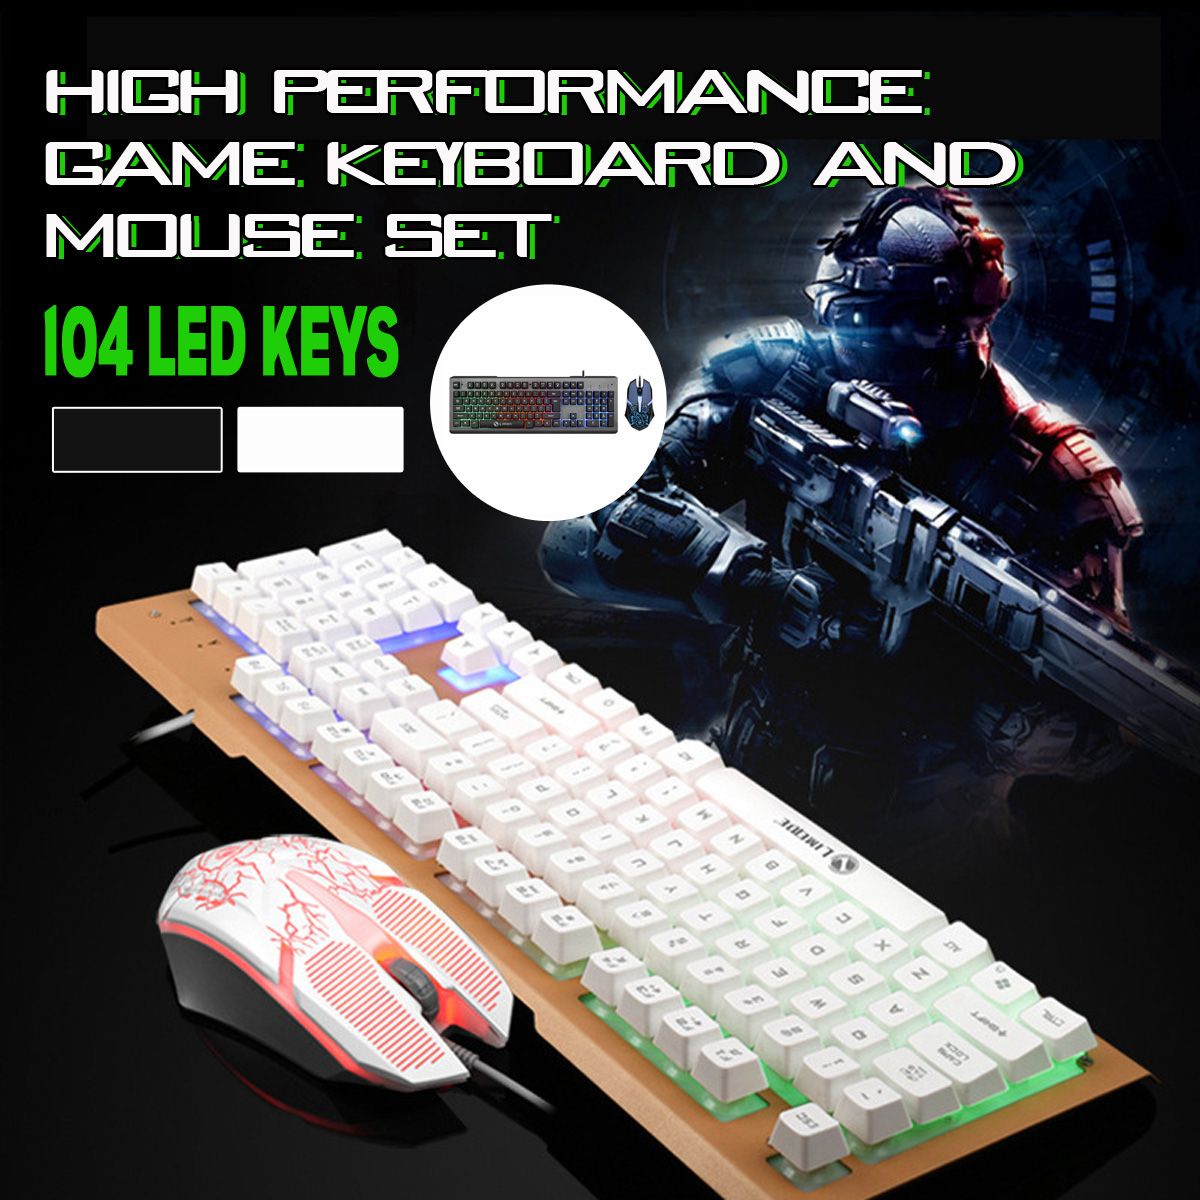 Colorful-Backlight-USB-Wired-Gaming-Keyboard-2400DPI-LED-Gaming-Mouse-Combo-for-PC-Game-E-sports-1588915